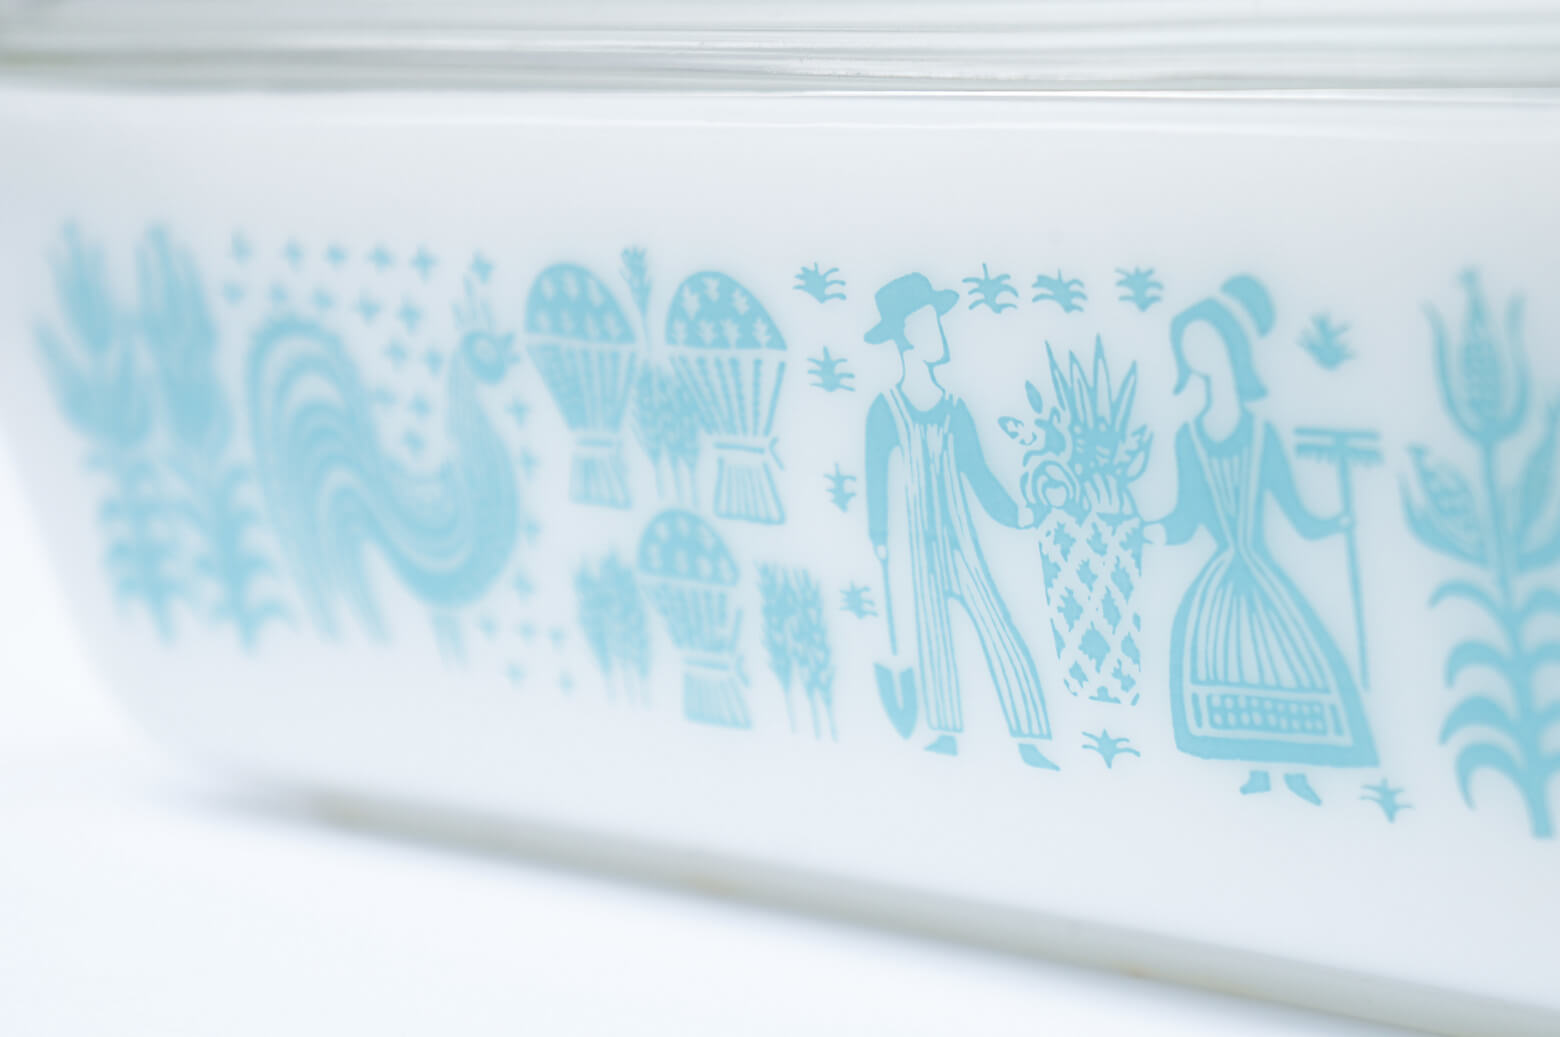 OLD PYREX BUTTER PRINT Refrigerator L size MADE IN USA / オールドパイレックス バター プリント レフリジレーター Lサイズ アメリカ製